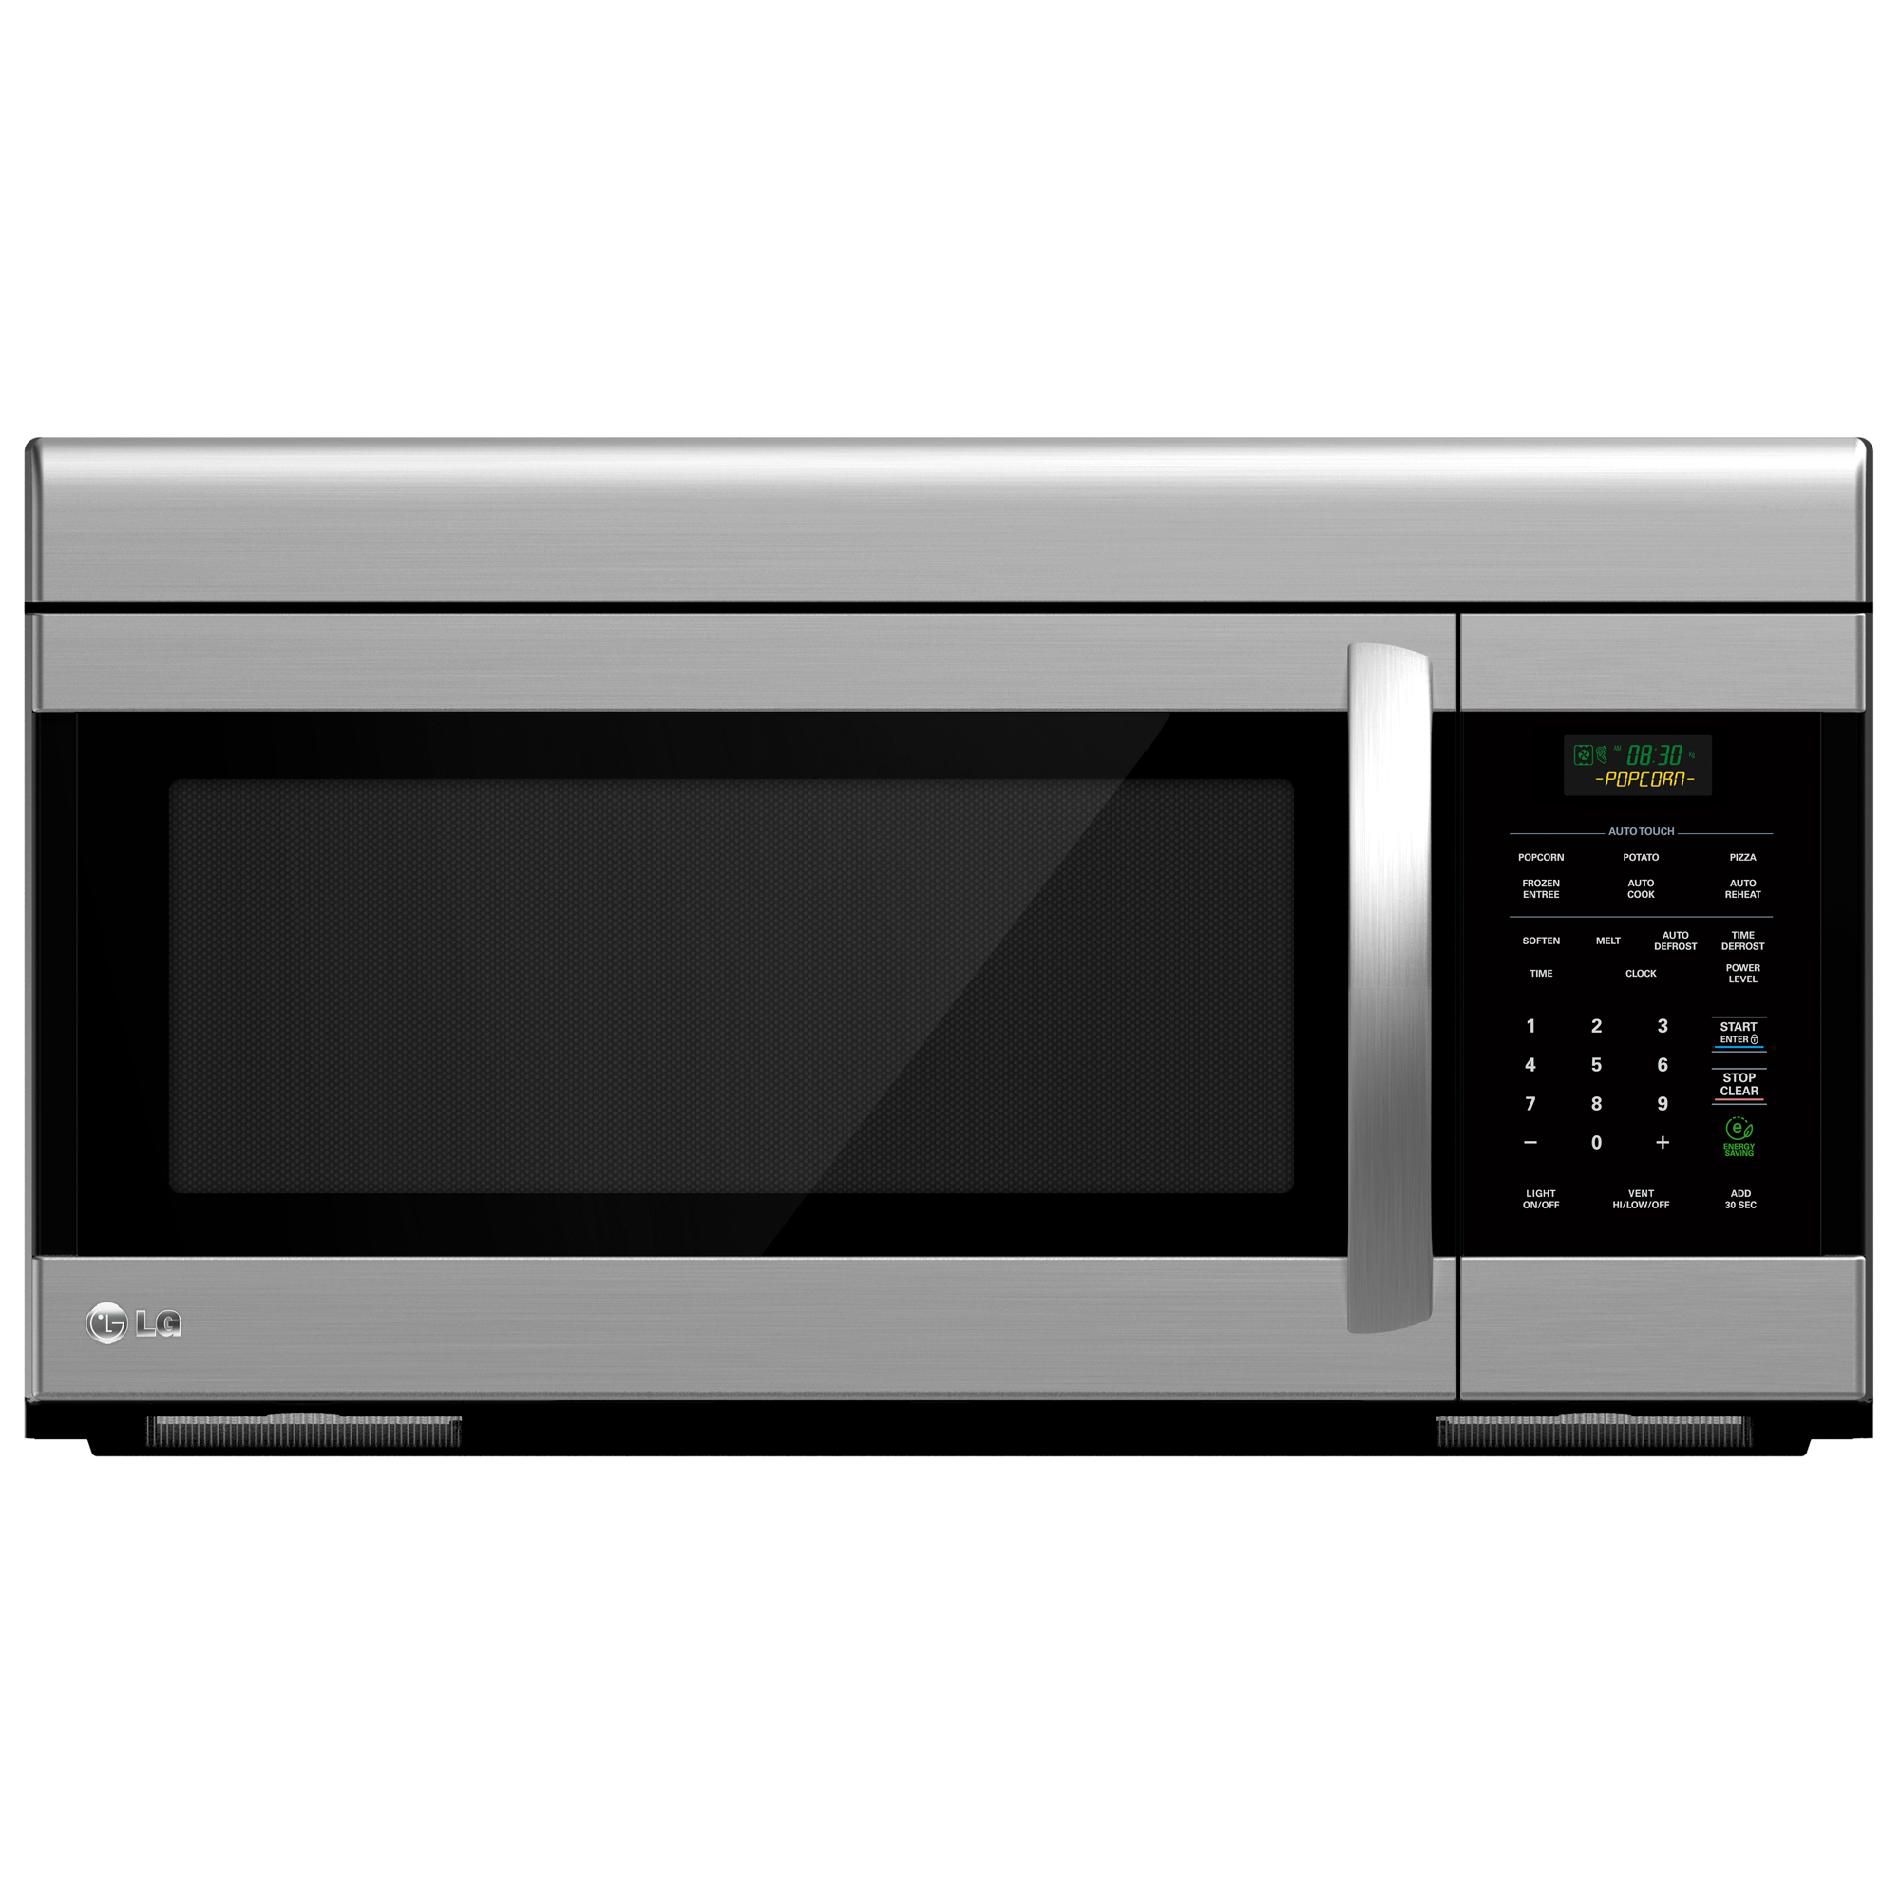 LG 1.6 Cu. Ft. Over-The-Range Microwave - Stainless Steel